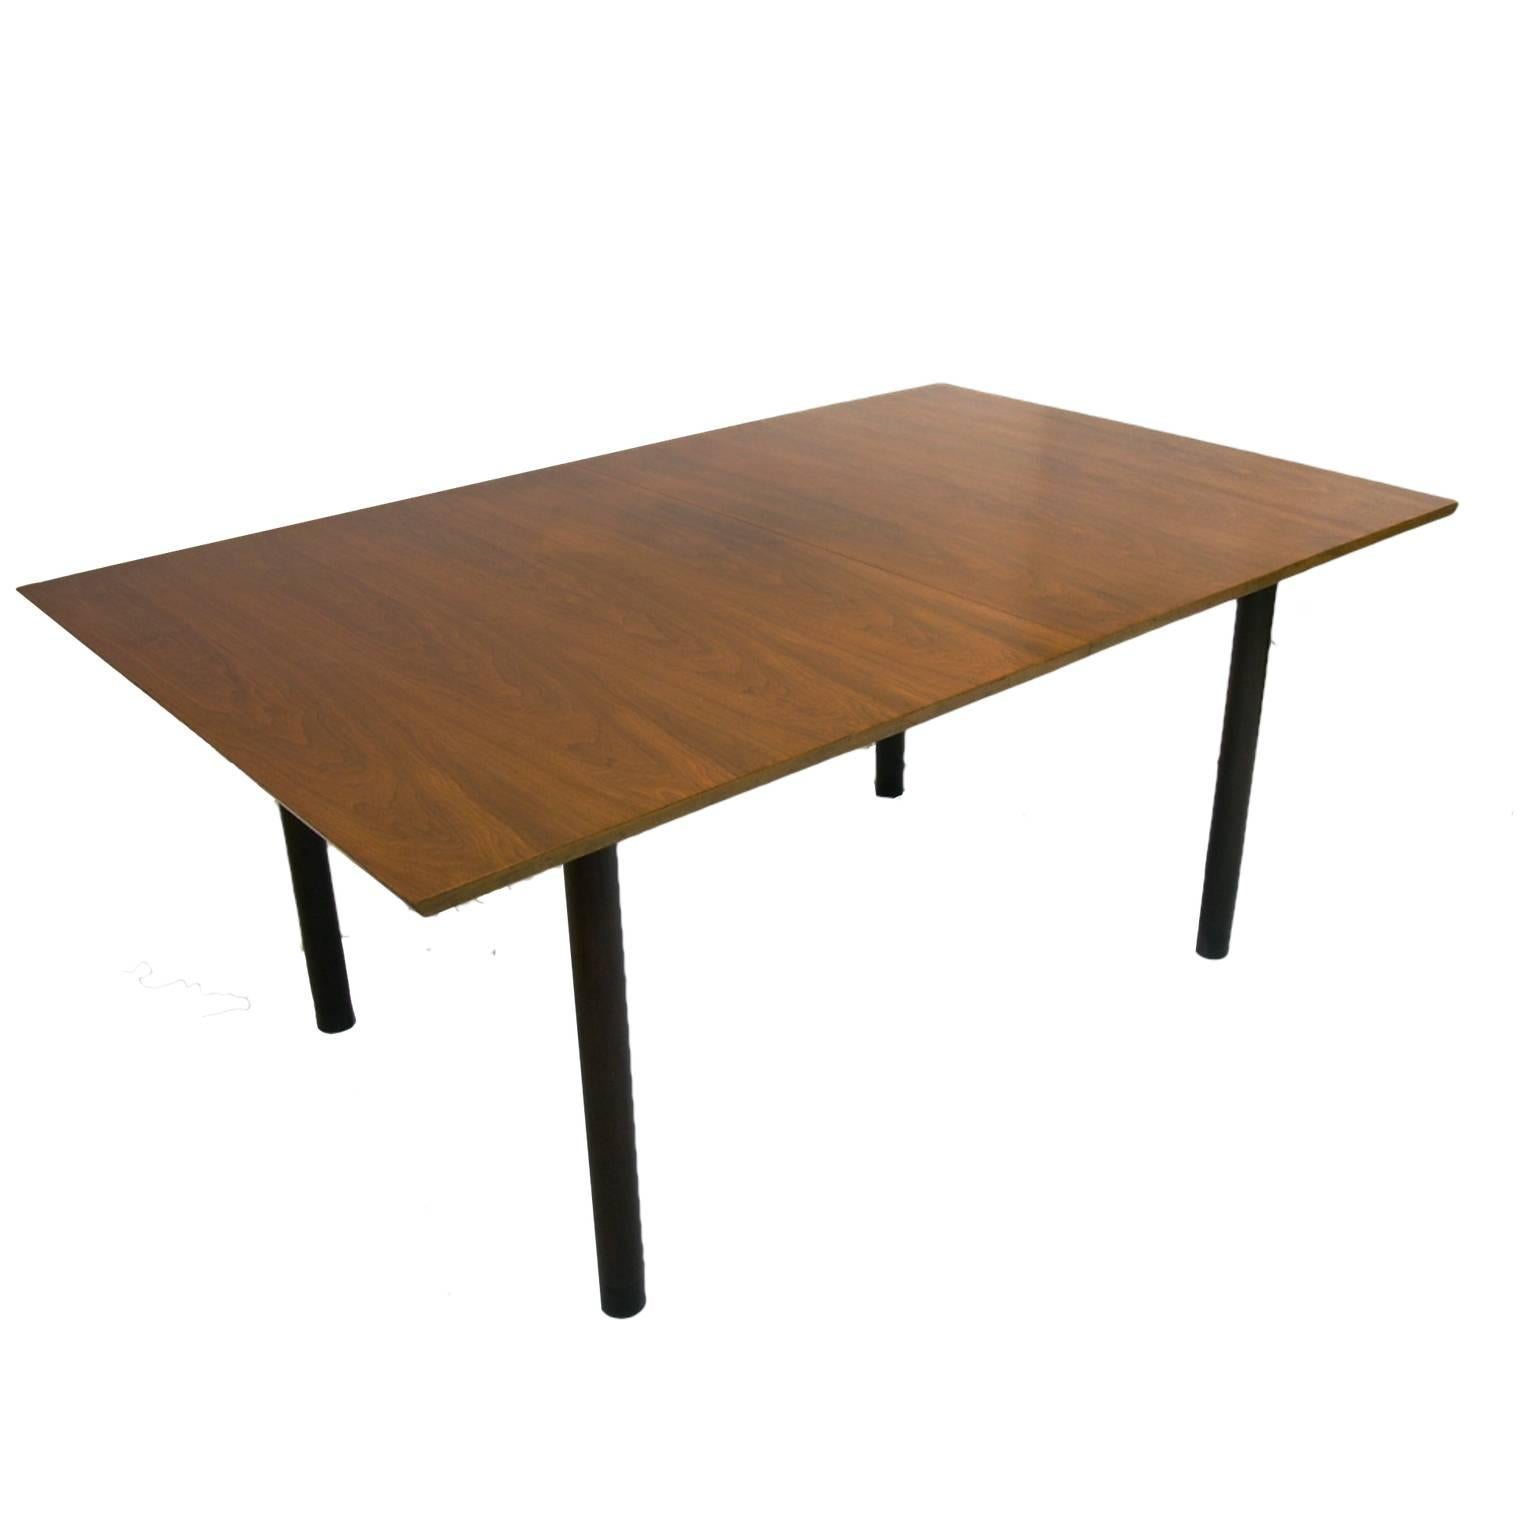 Mid-Century Modern Edward Wormley for Dunbar Walnut Extension Dining Table w Leather Wrapped Feet